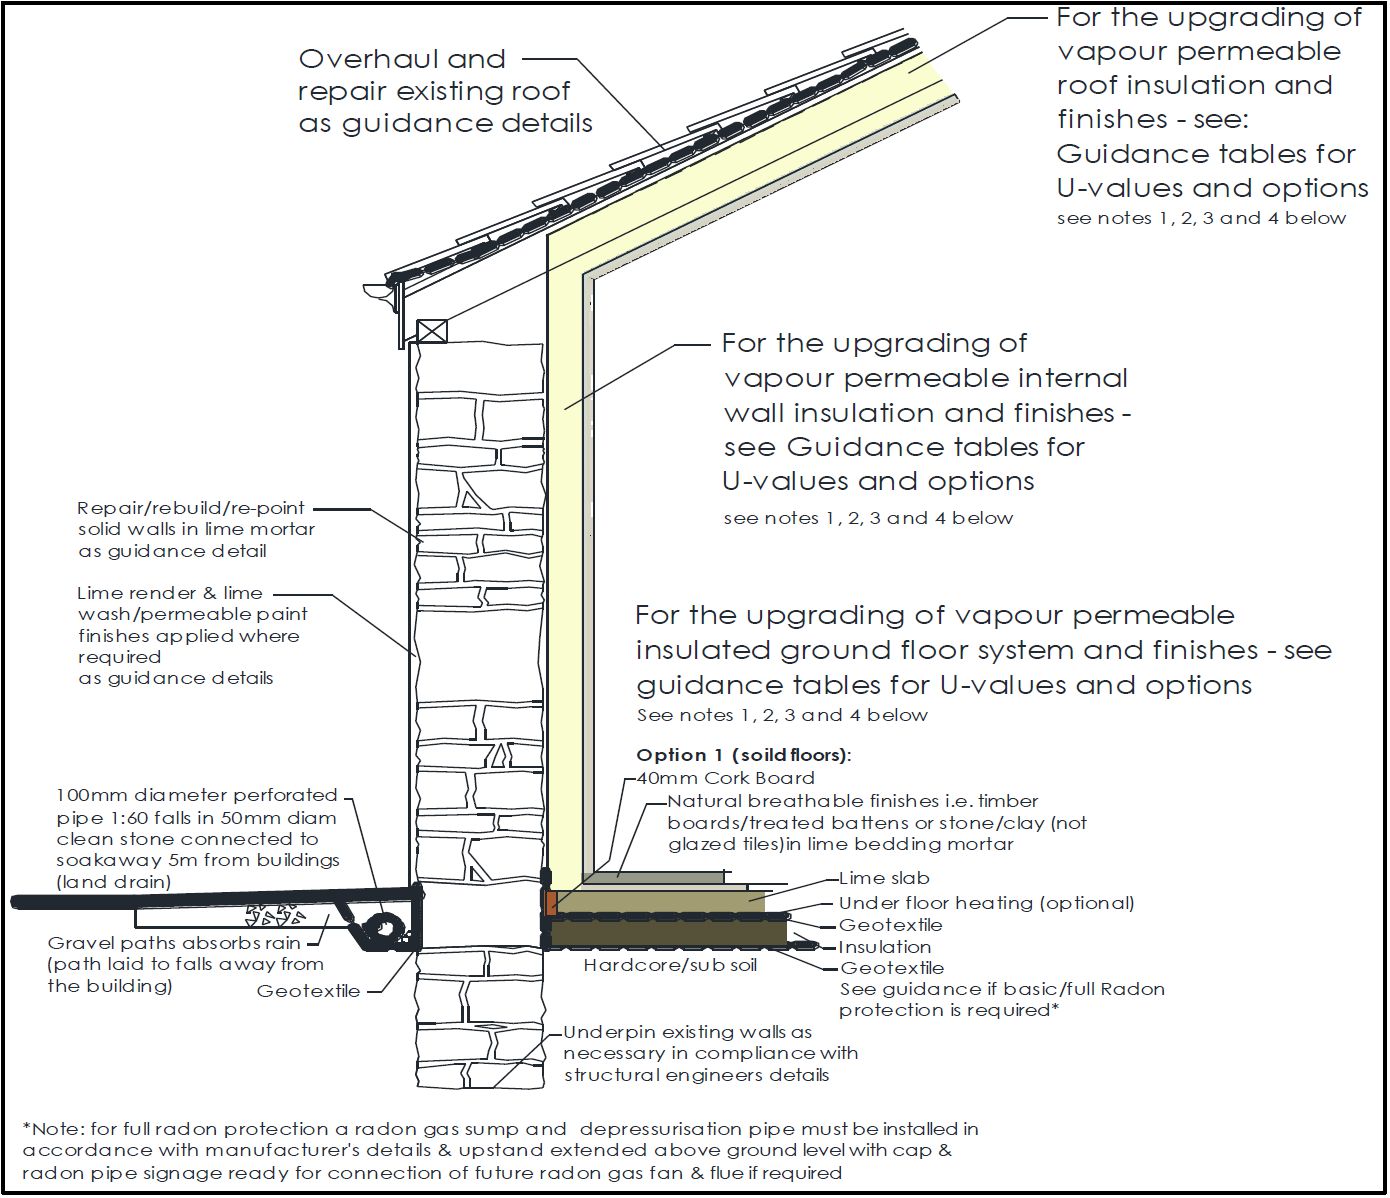 Section through traditional building showing how retrofit could be achieved